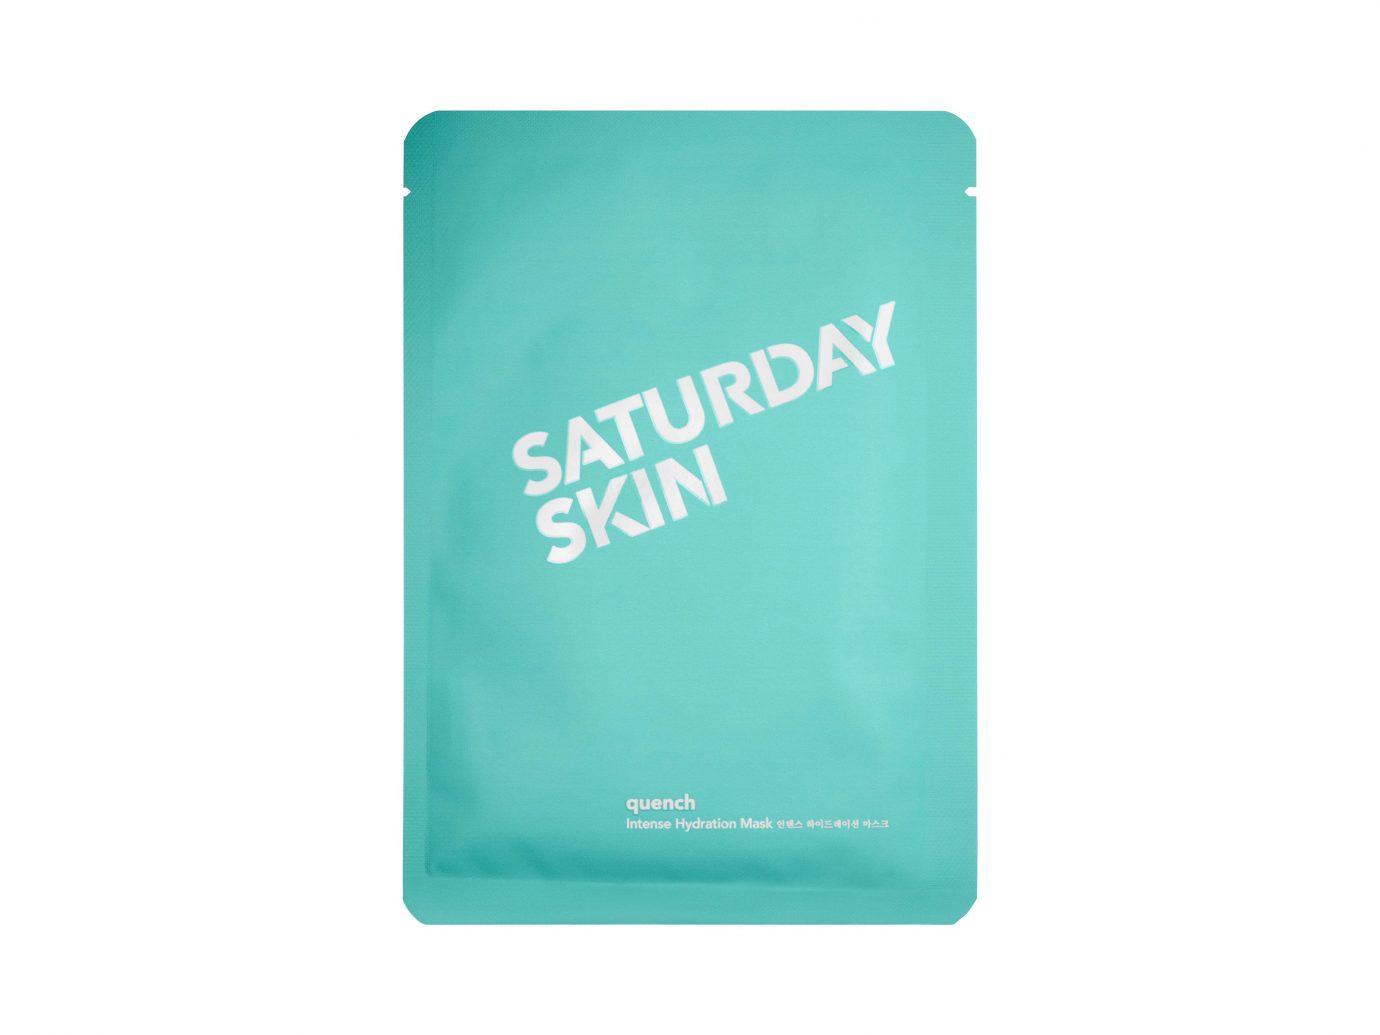 SATURDAY SKIN Quench Intense Hydration Mask